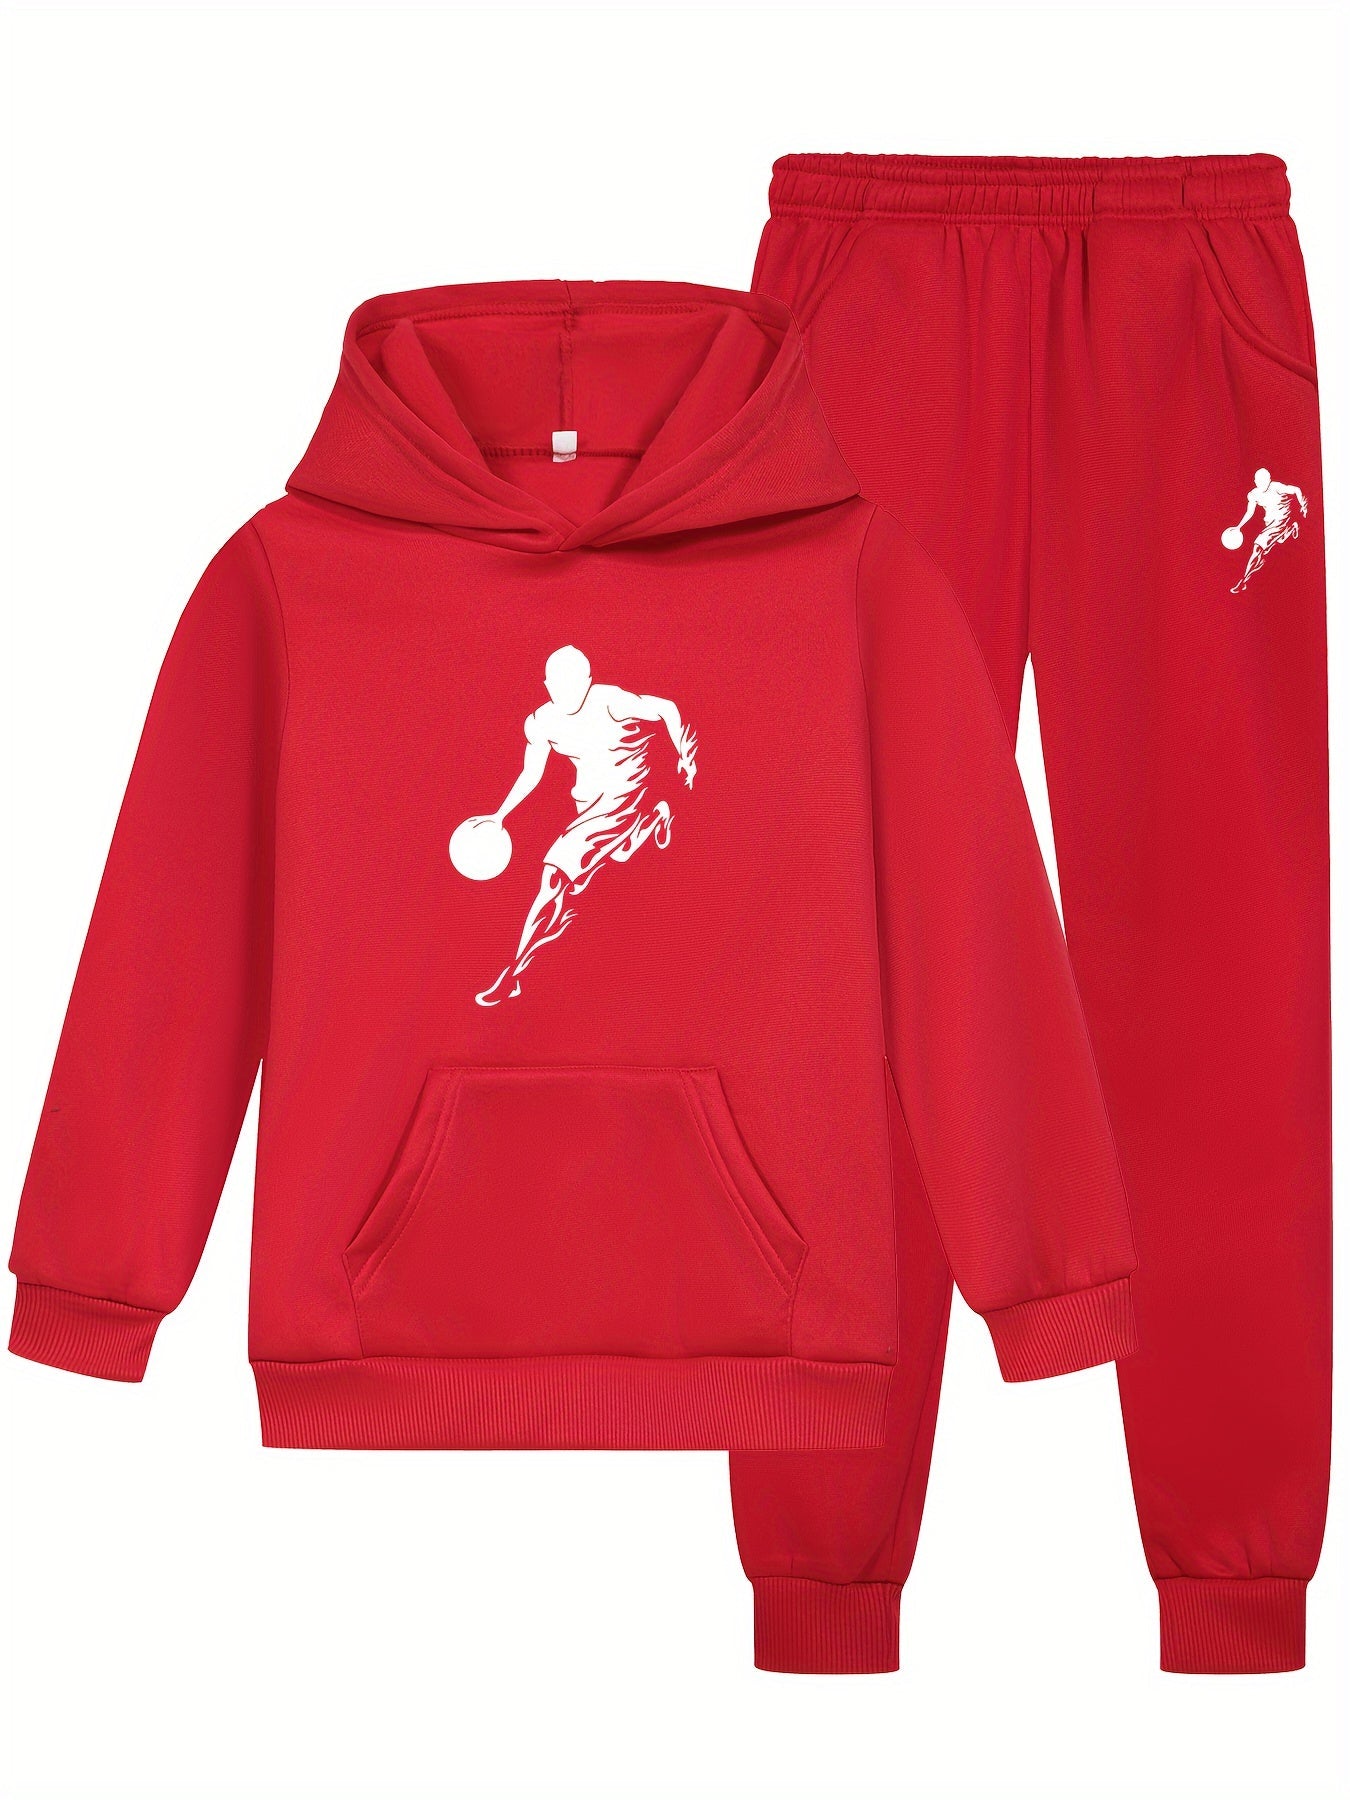 2pcs Vibrant Basketball - Themed Boys Hooded Sweatshirt & Joggers Set - Cozy Athletic Wear for Daily Use and Playdates - Ammpoure Wellbeing